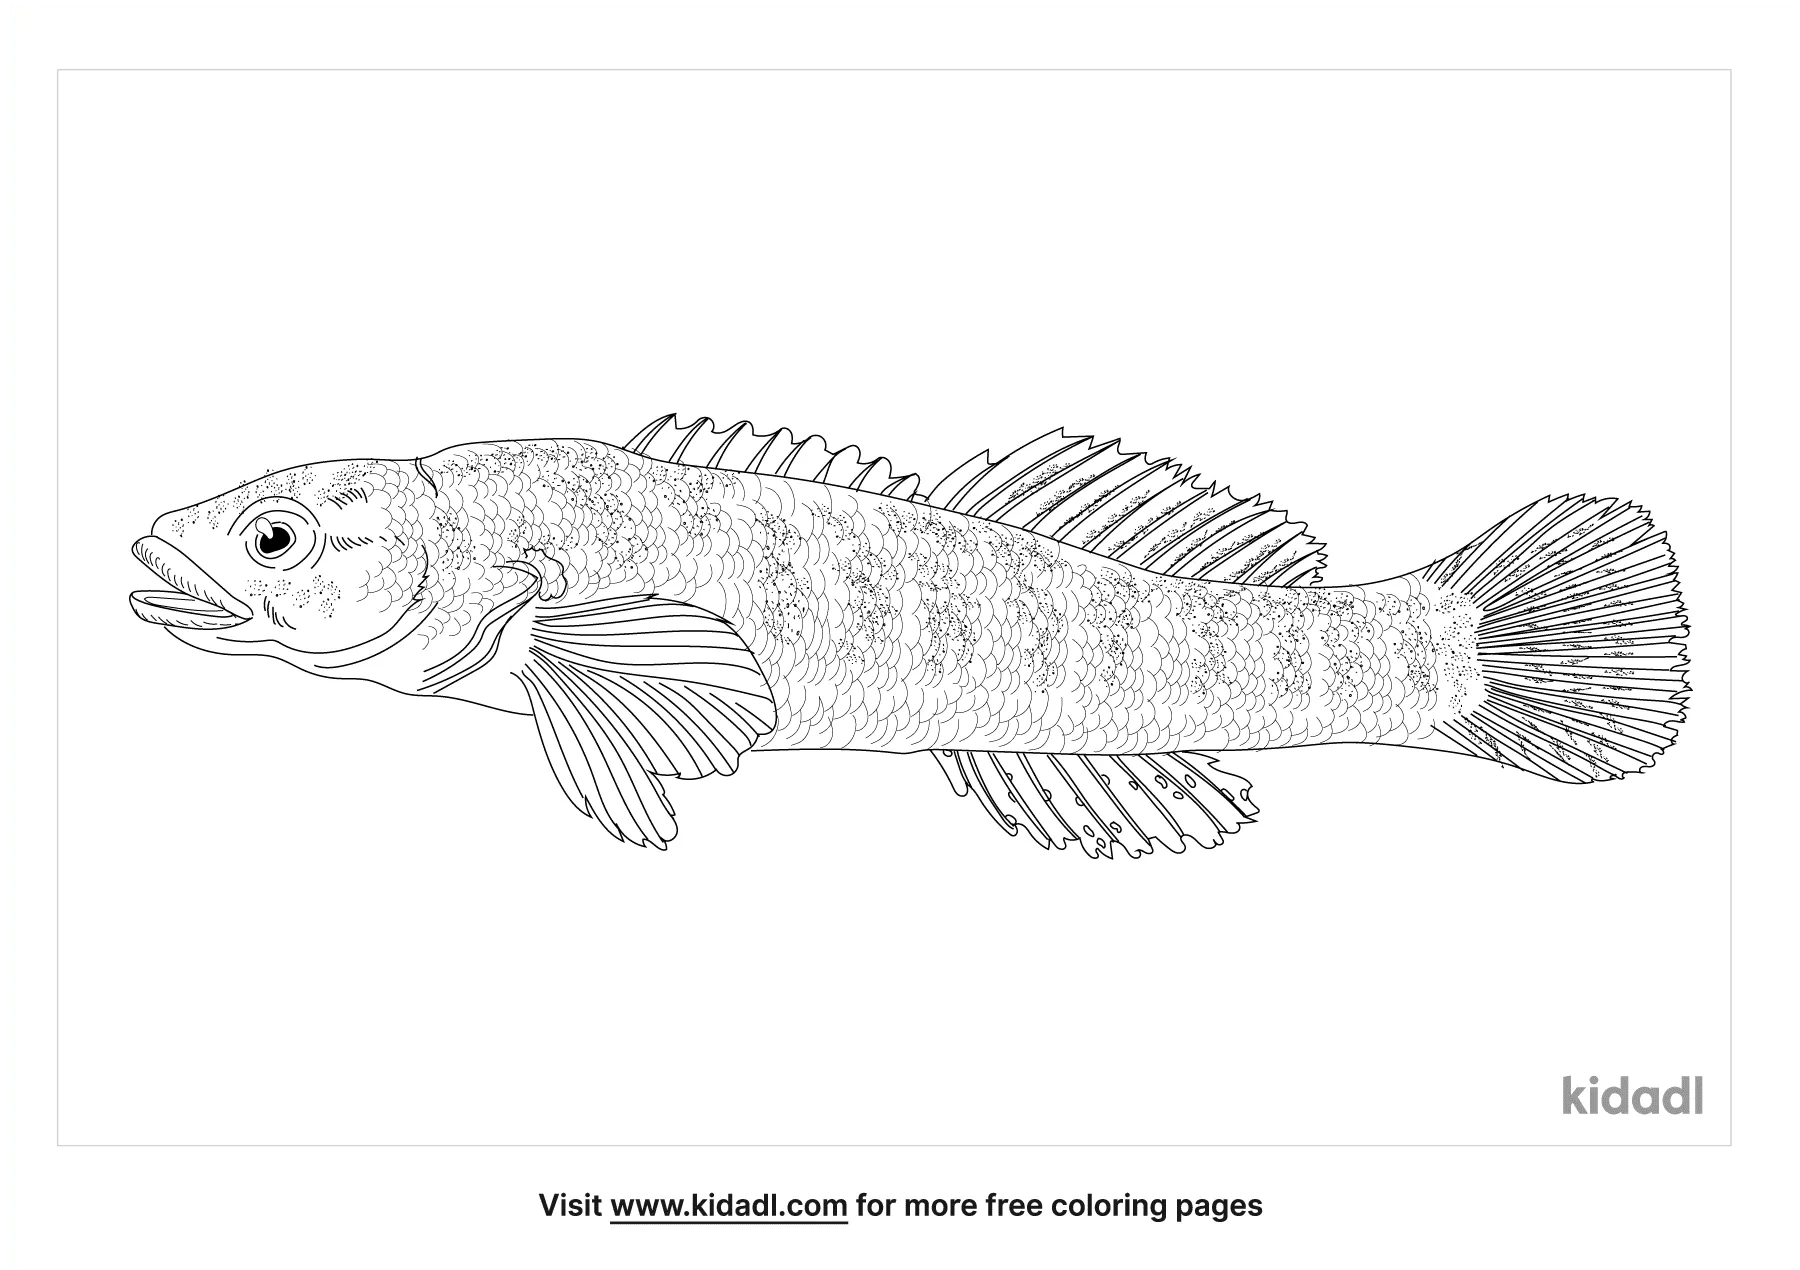 Fantail Darter Coloring Page